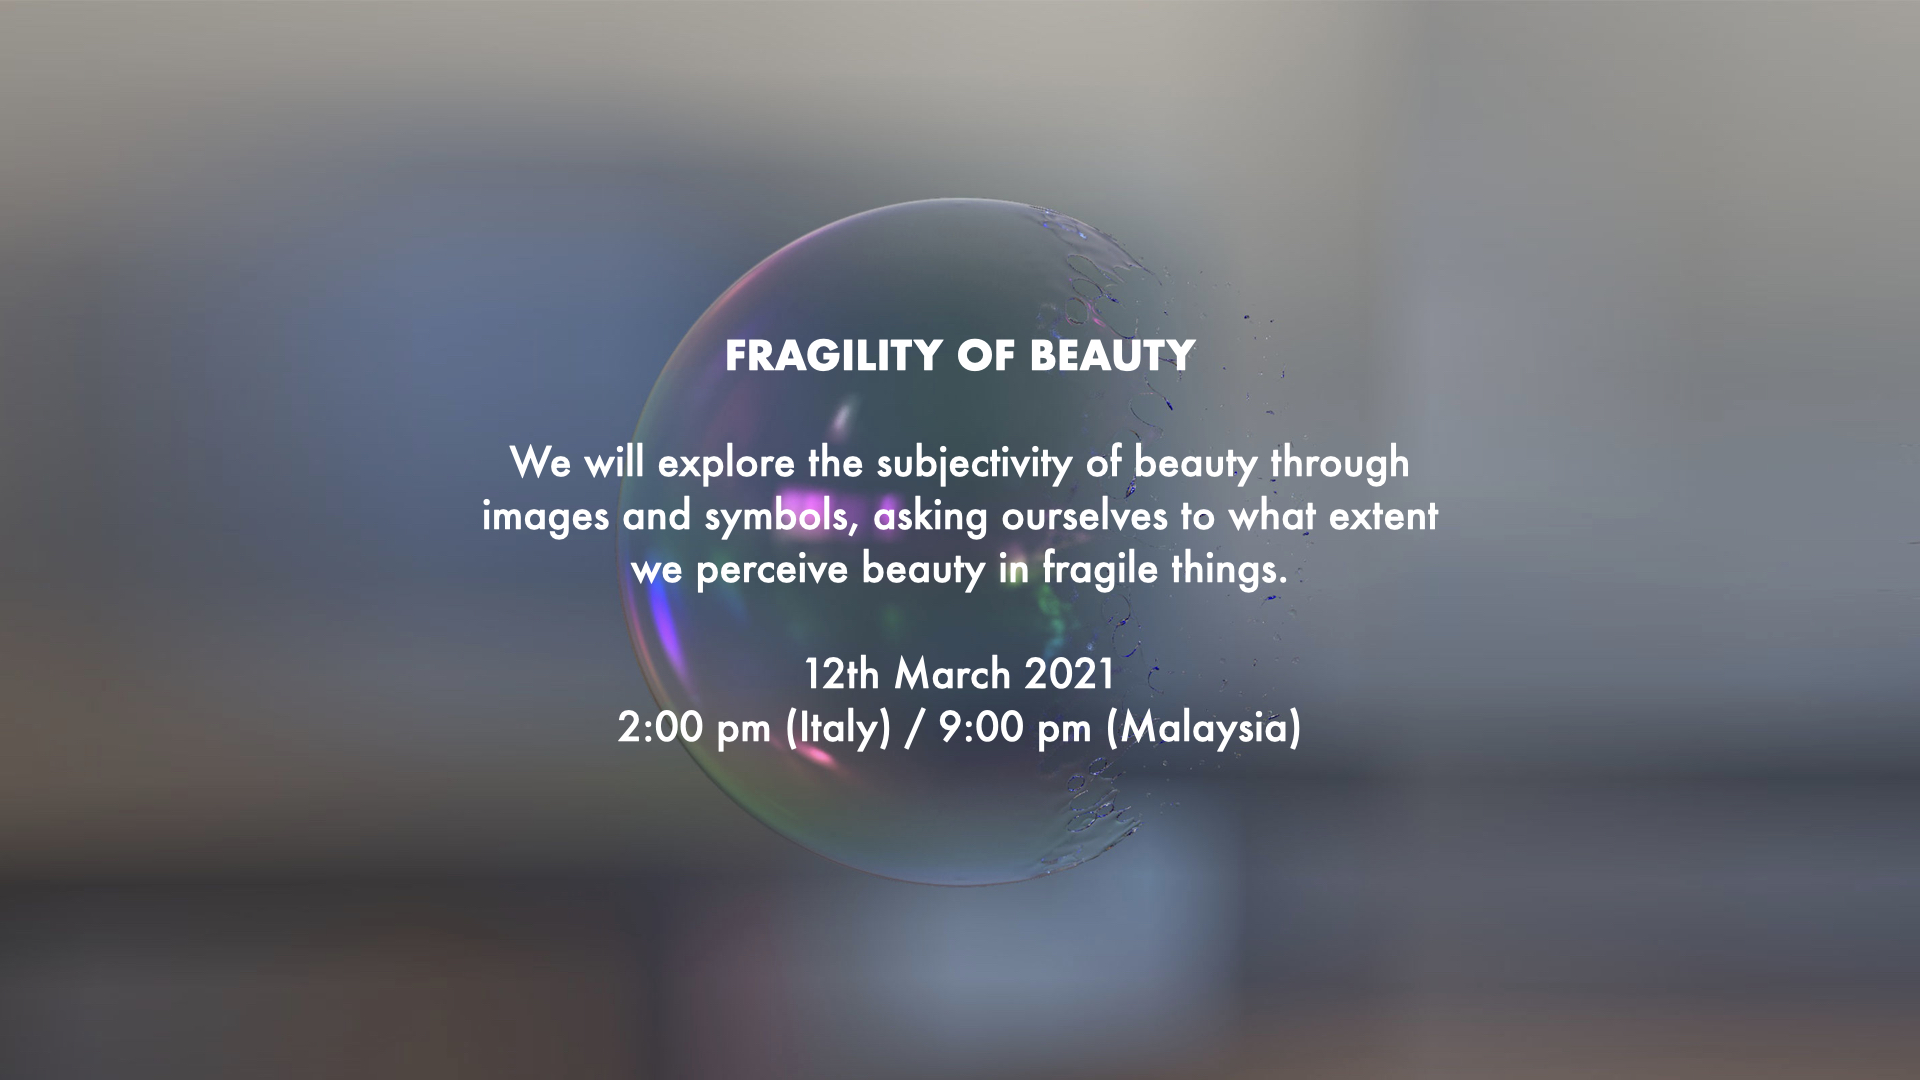 FRAGILITY OF BEAUTY - A Students' Diary #1